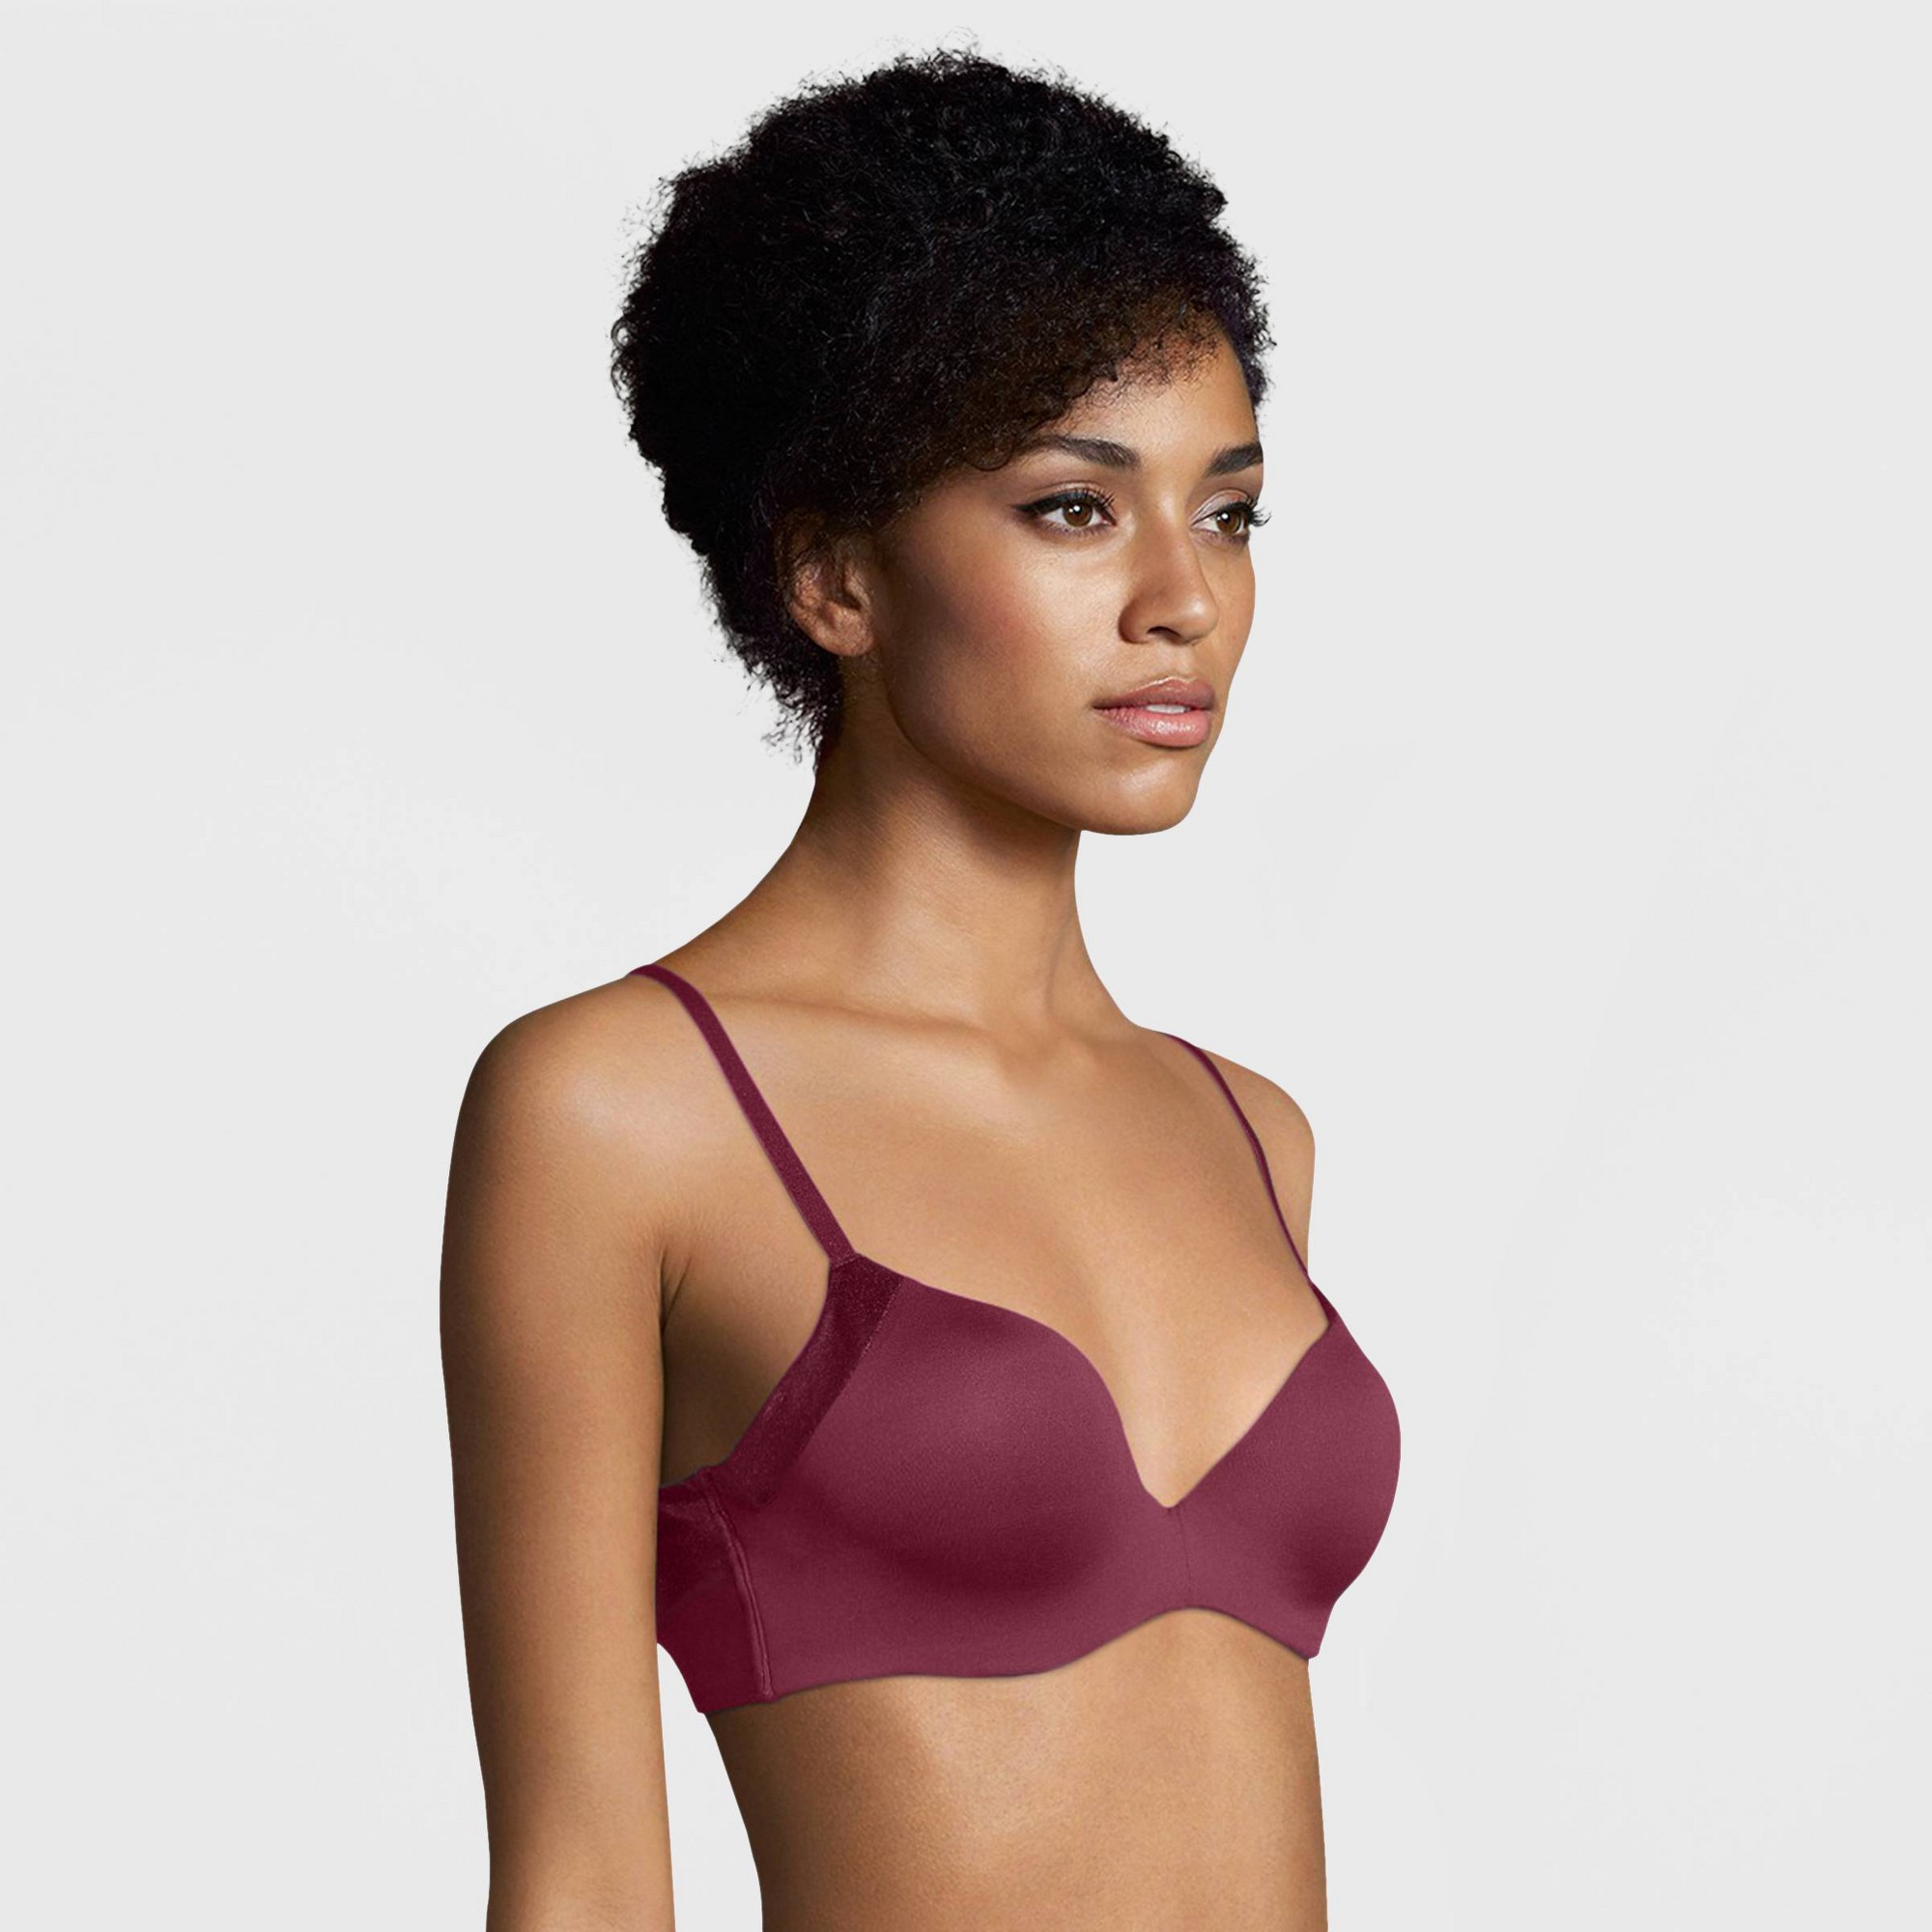 Maidenform Self Expressions Women's Smooth Finish Push-Up Bra SE0009 - Red  34A, by Maidenform